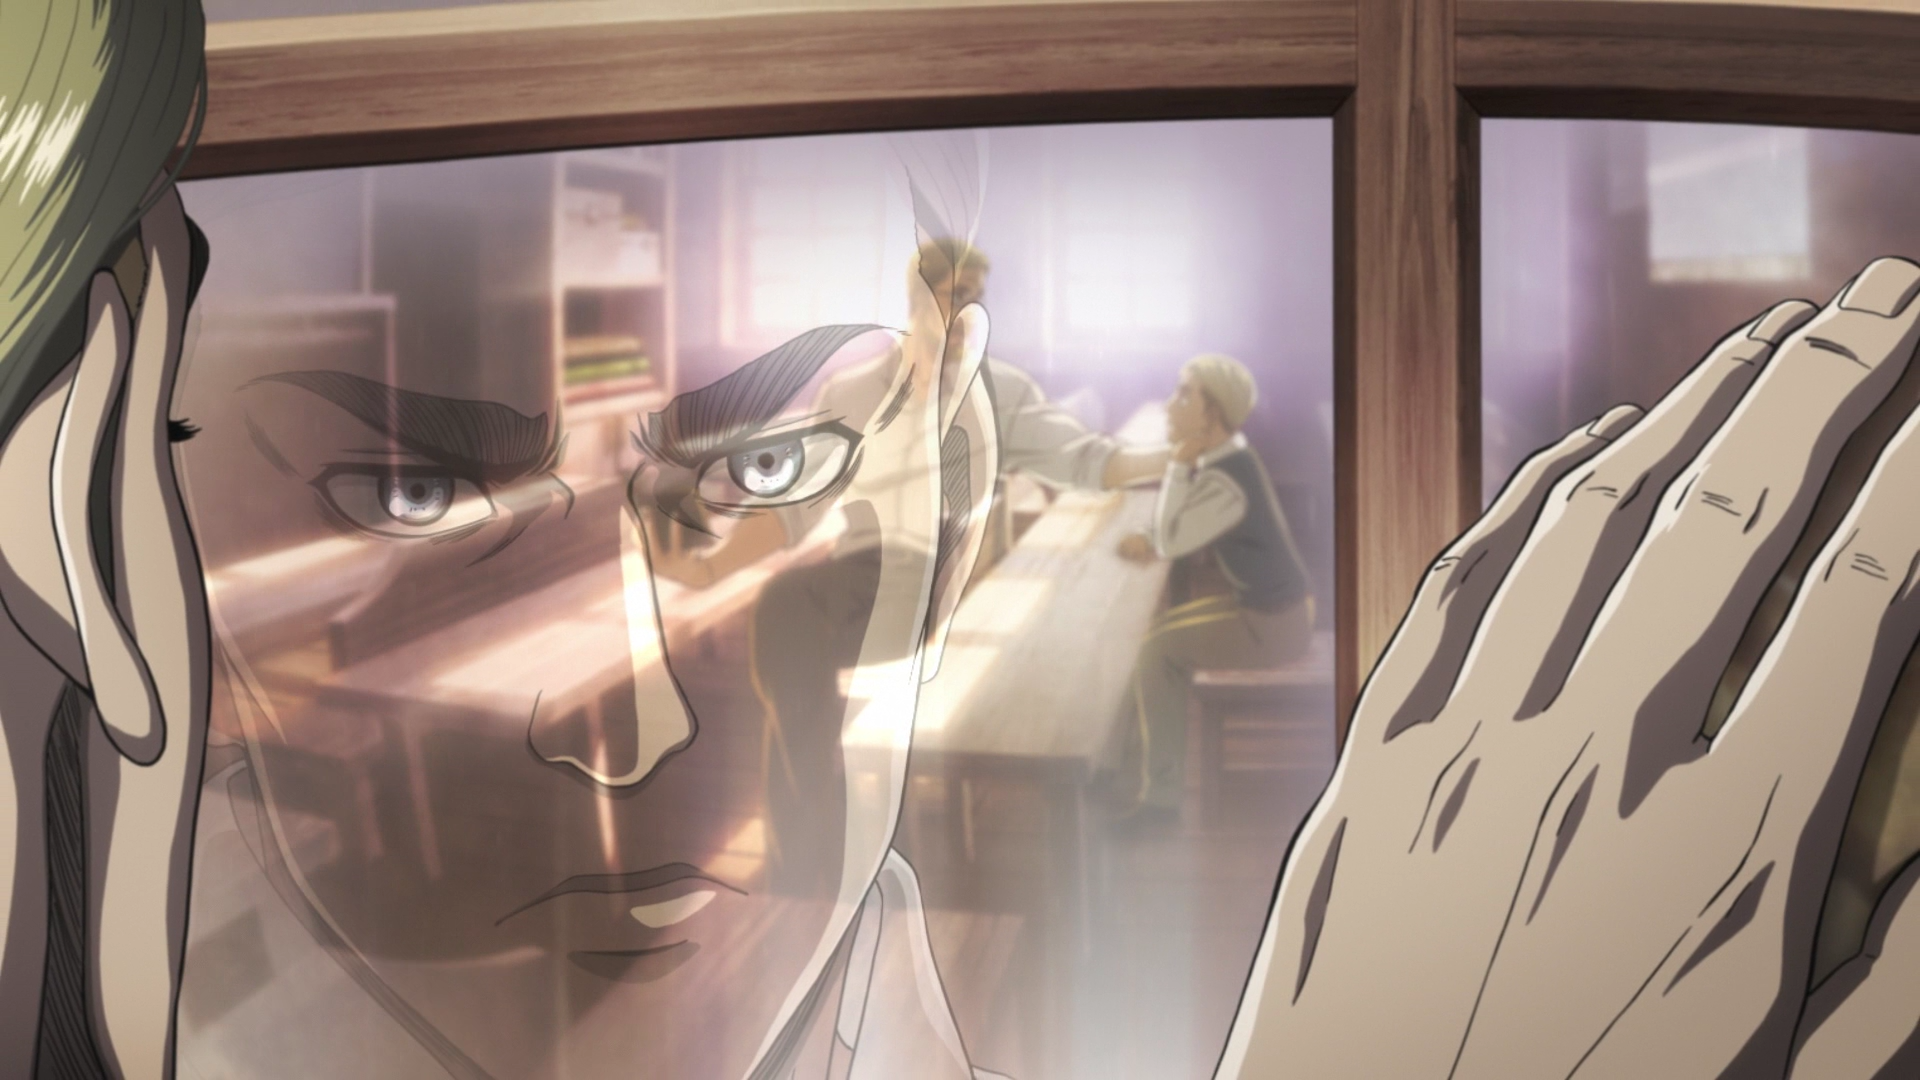 season 3 spoiler] Erwin looks more like Historia's parent than either of  her parents does. xP : r/ErwinSmith